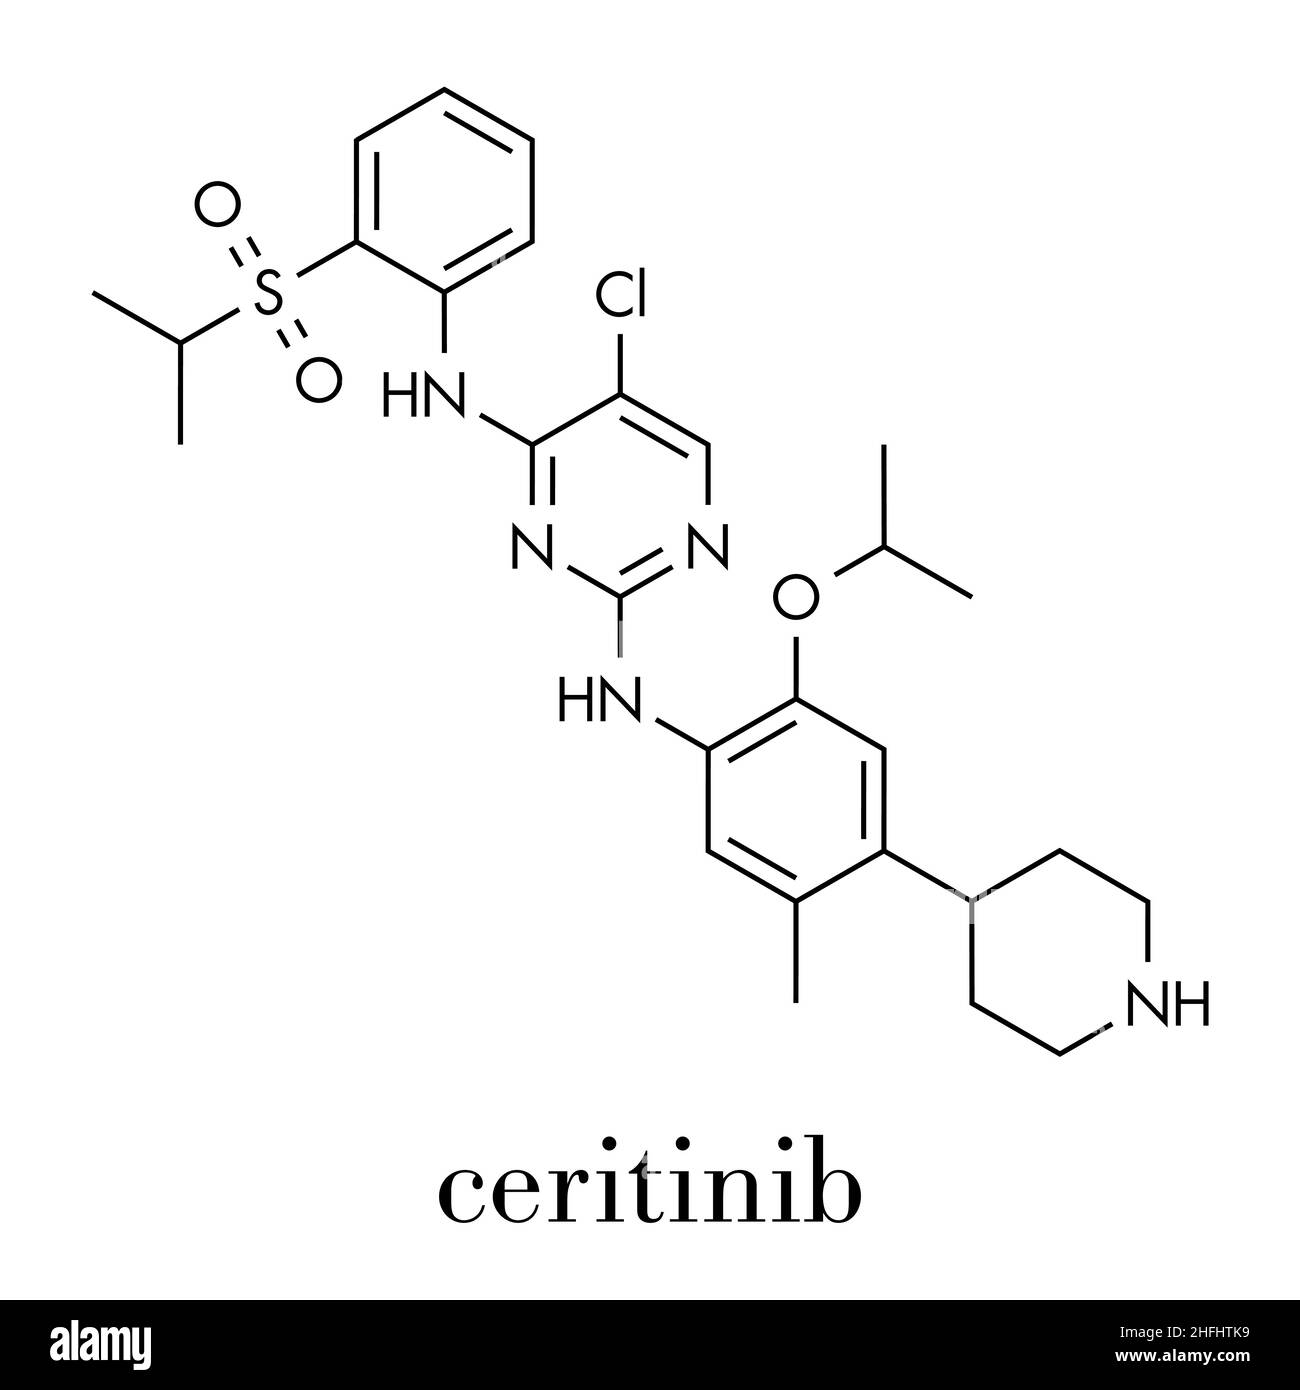 Ceritinib cancer drug molecule. ALK inhibitor used in treatment of metastatic non-small cell lung cancer. Skeletal formula. Stock Vector